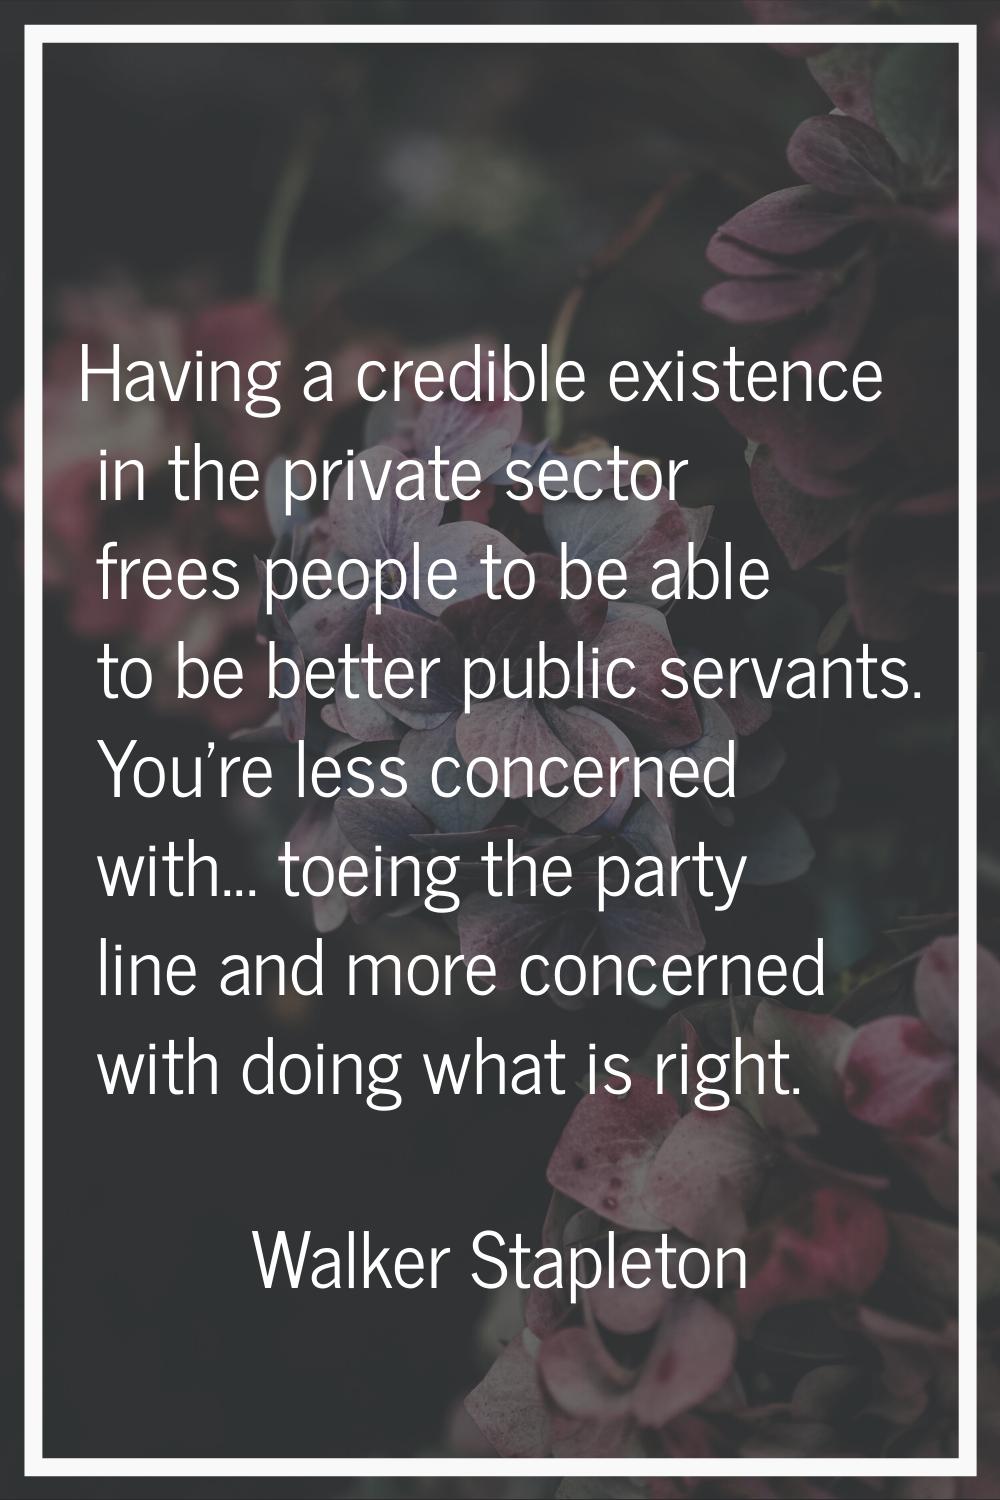 Having a credible existence in the private sector frees people to be able to be better public serva